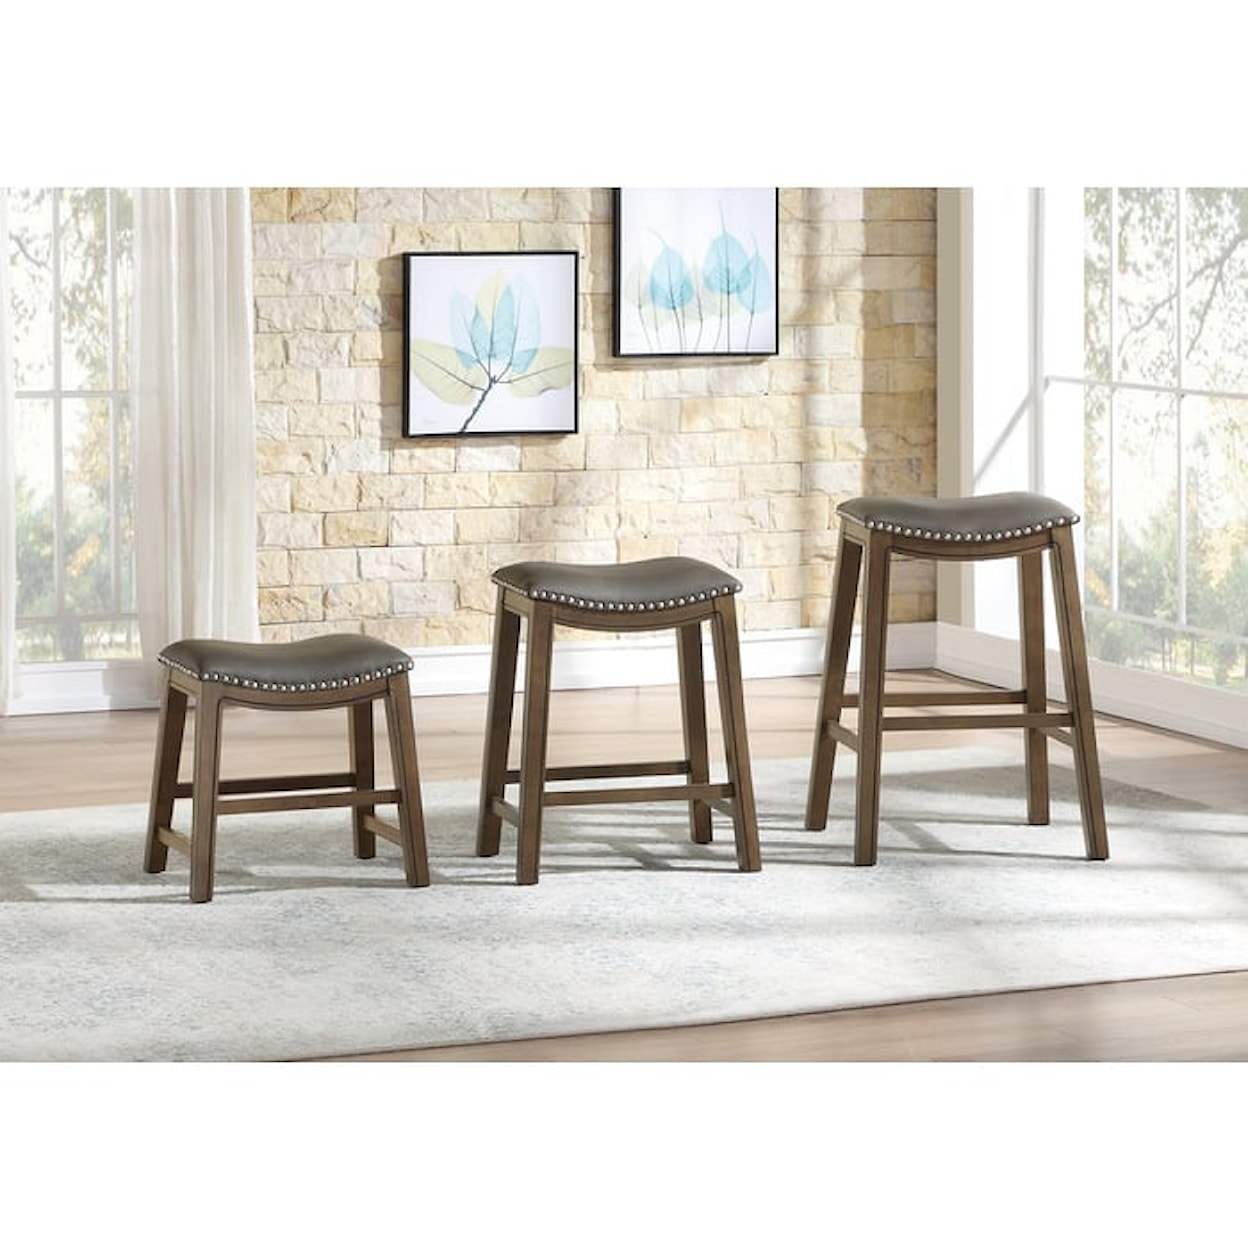 Homelegance Furniture Ordway 24 Counter Height Stool, Gray